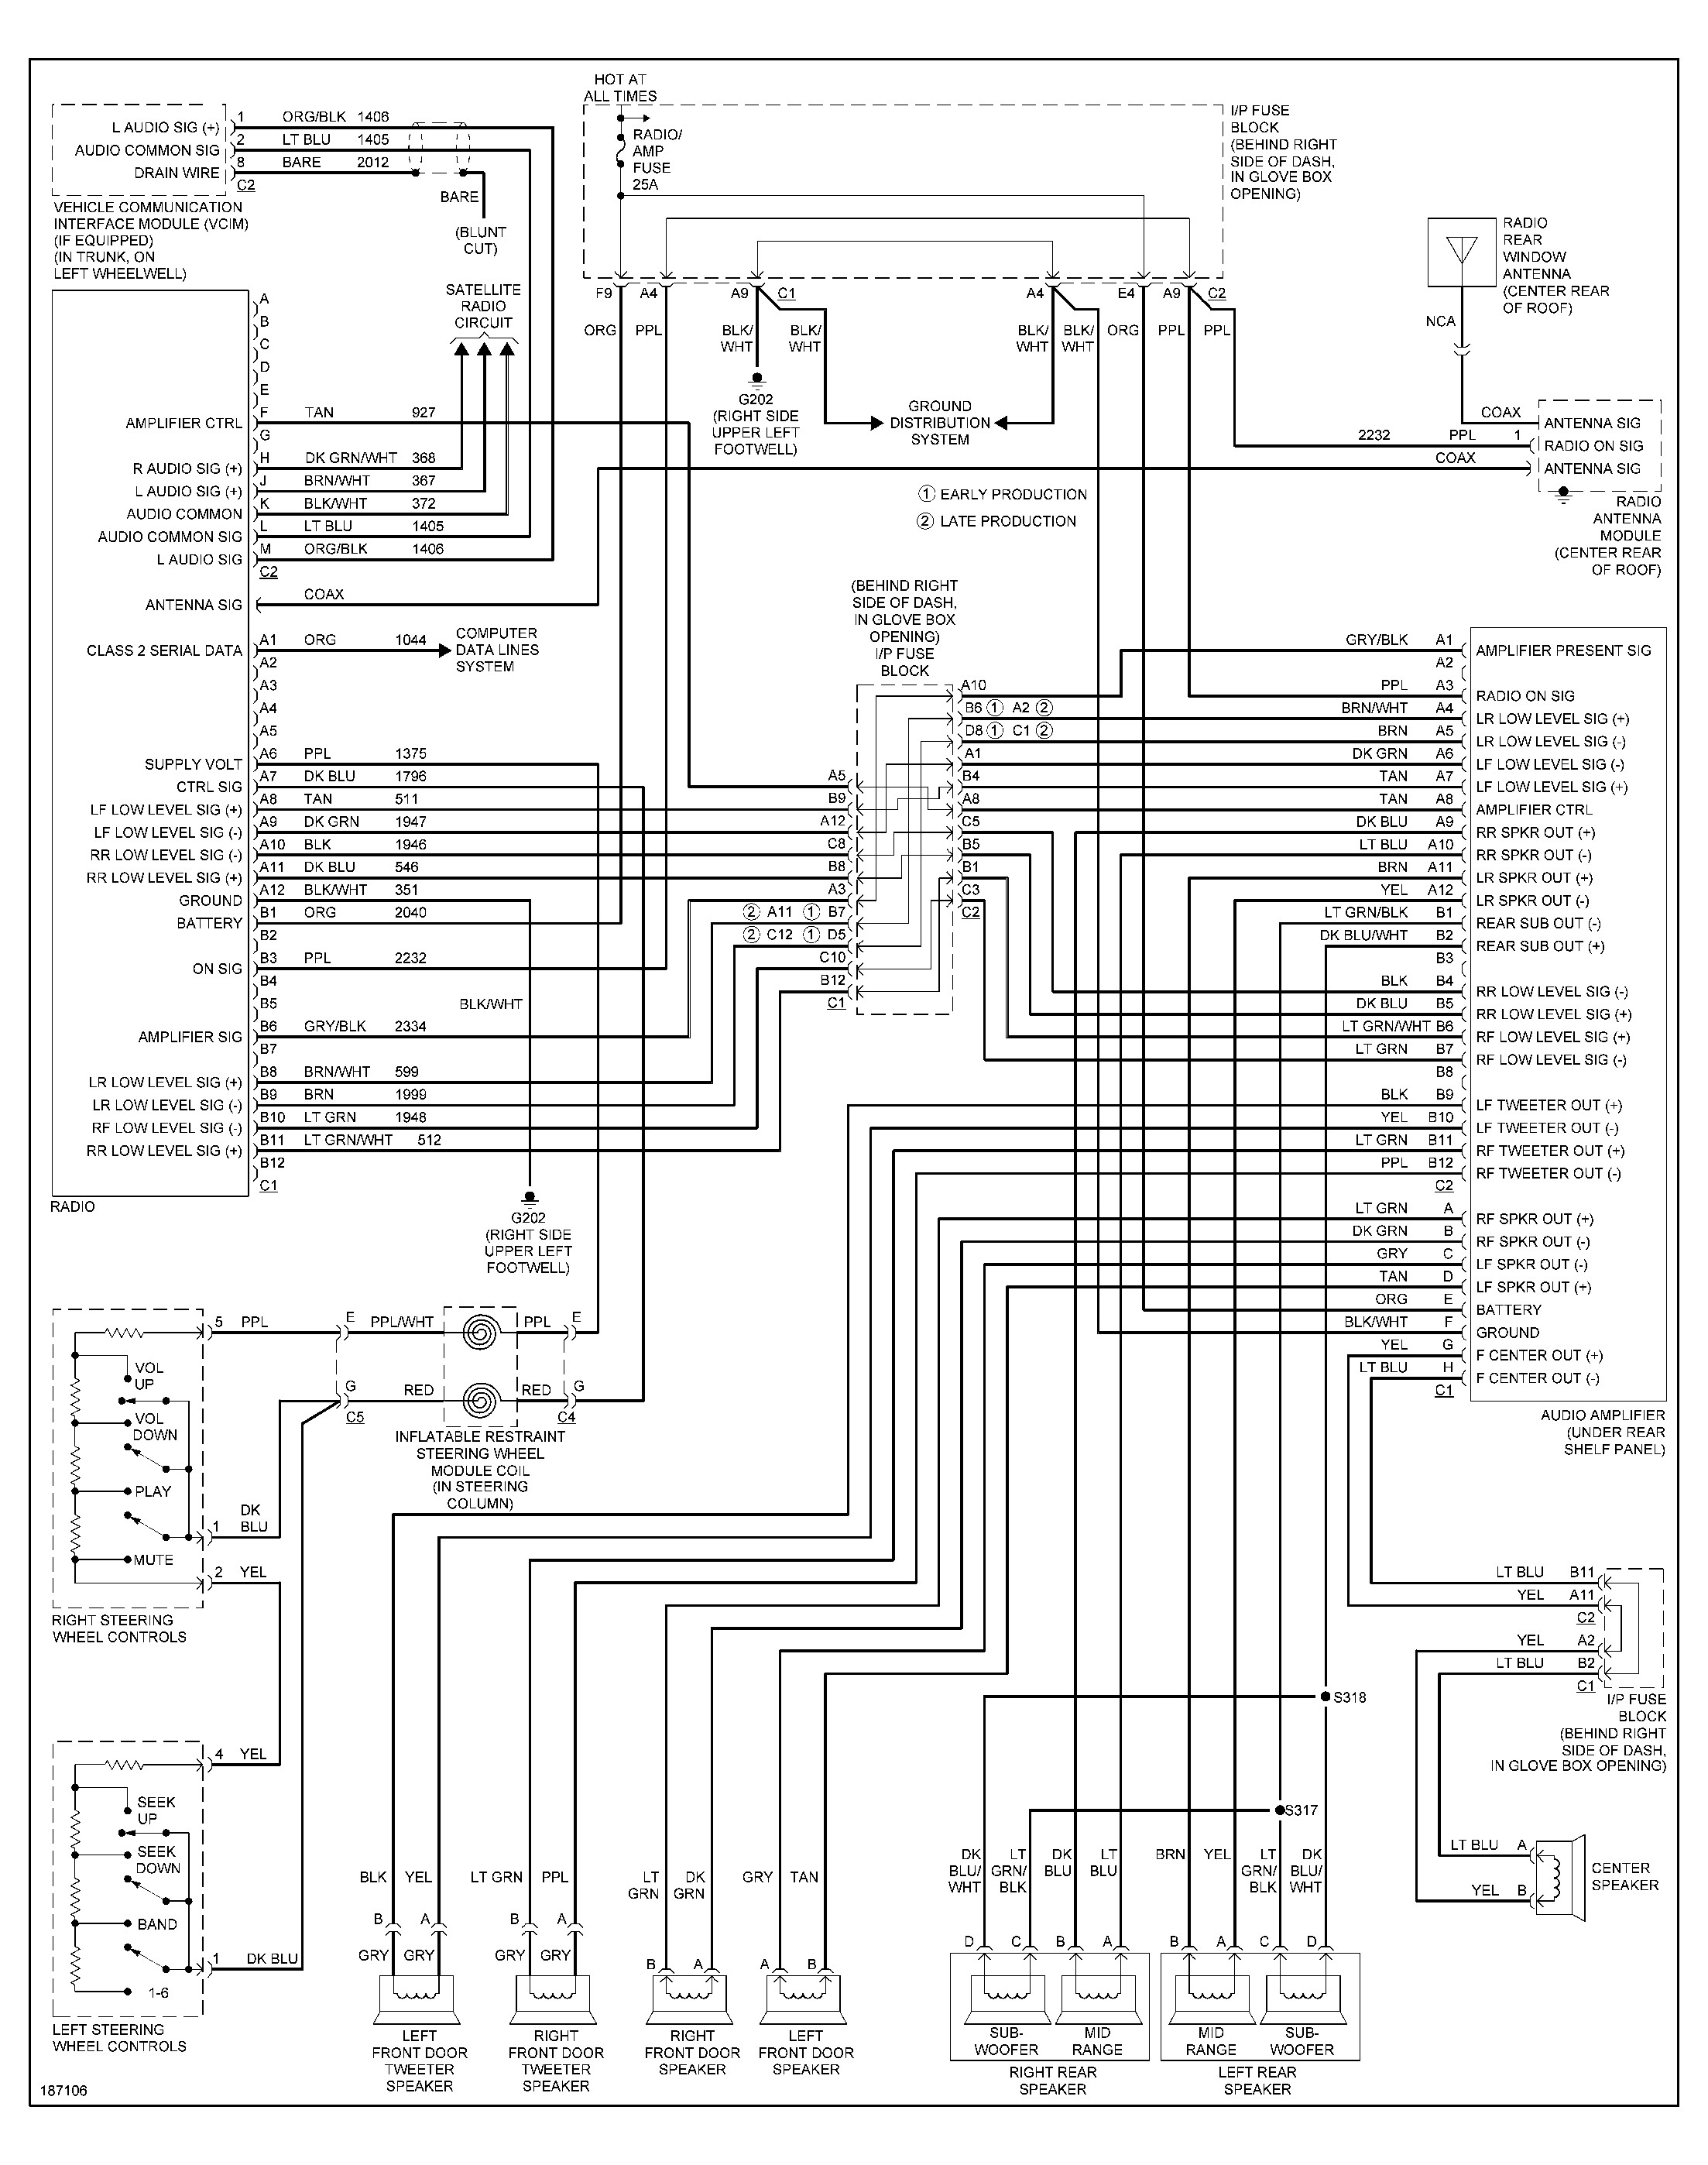 Headlight Wiring Diagram Color Coded For 2002 Pontiac Grand Prix Gt from mainetreasurechest.com